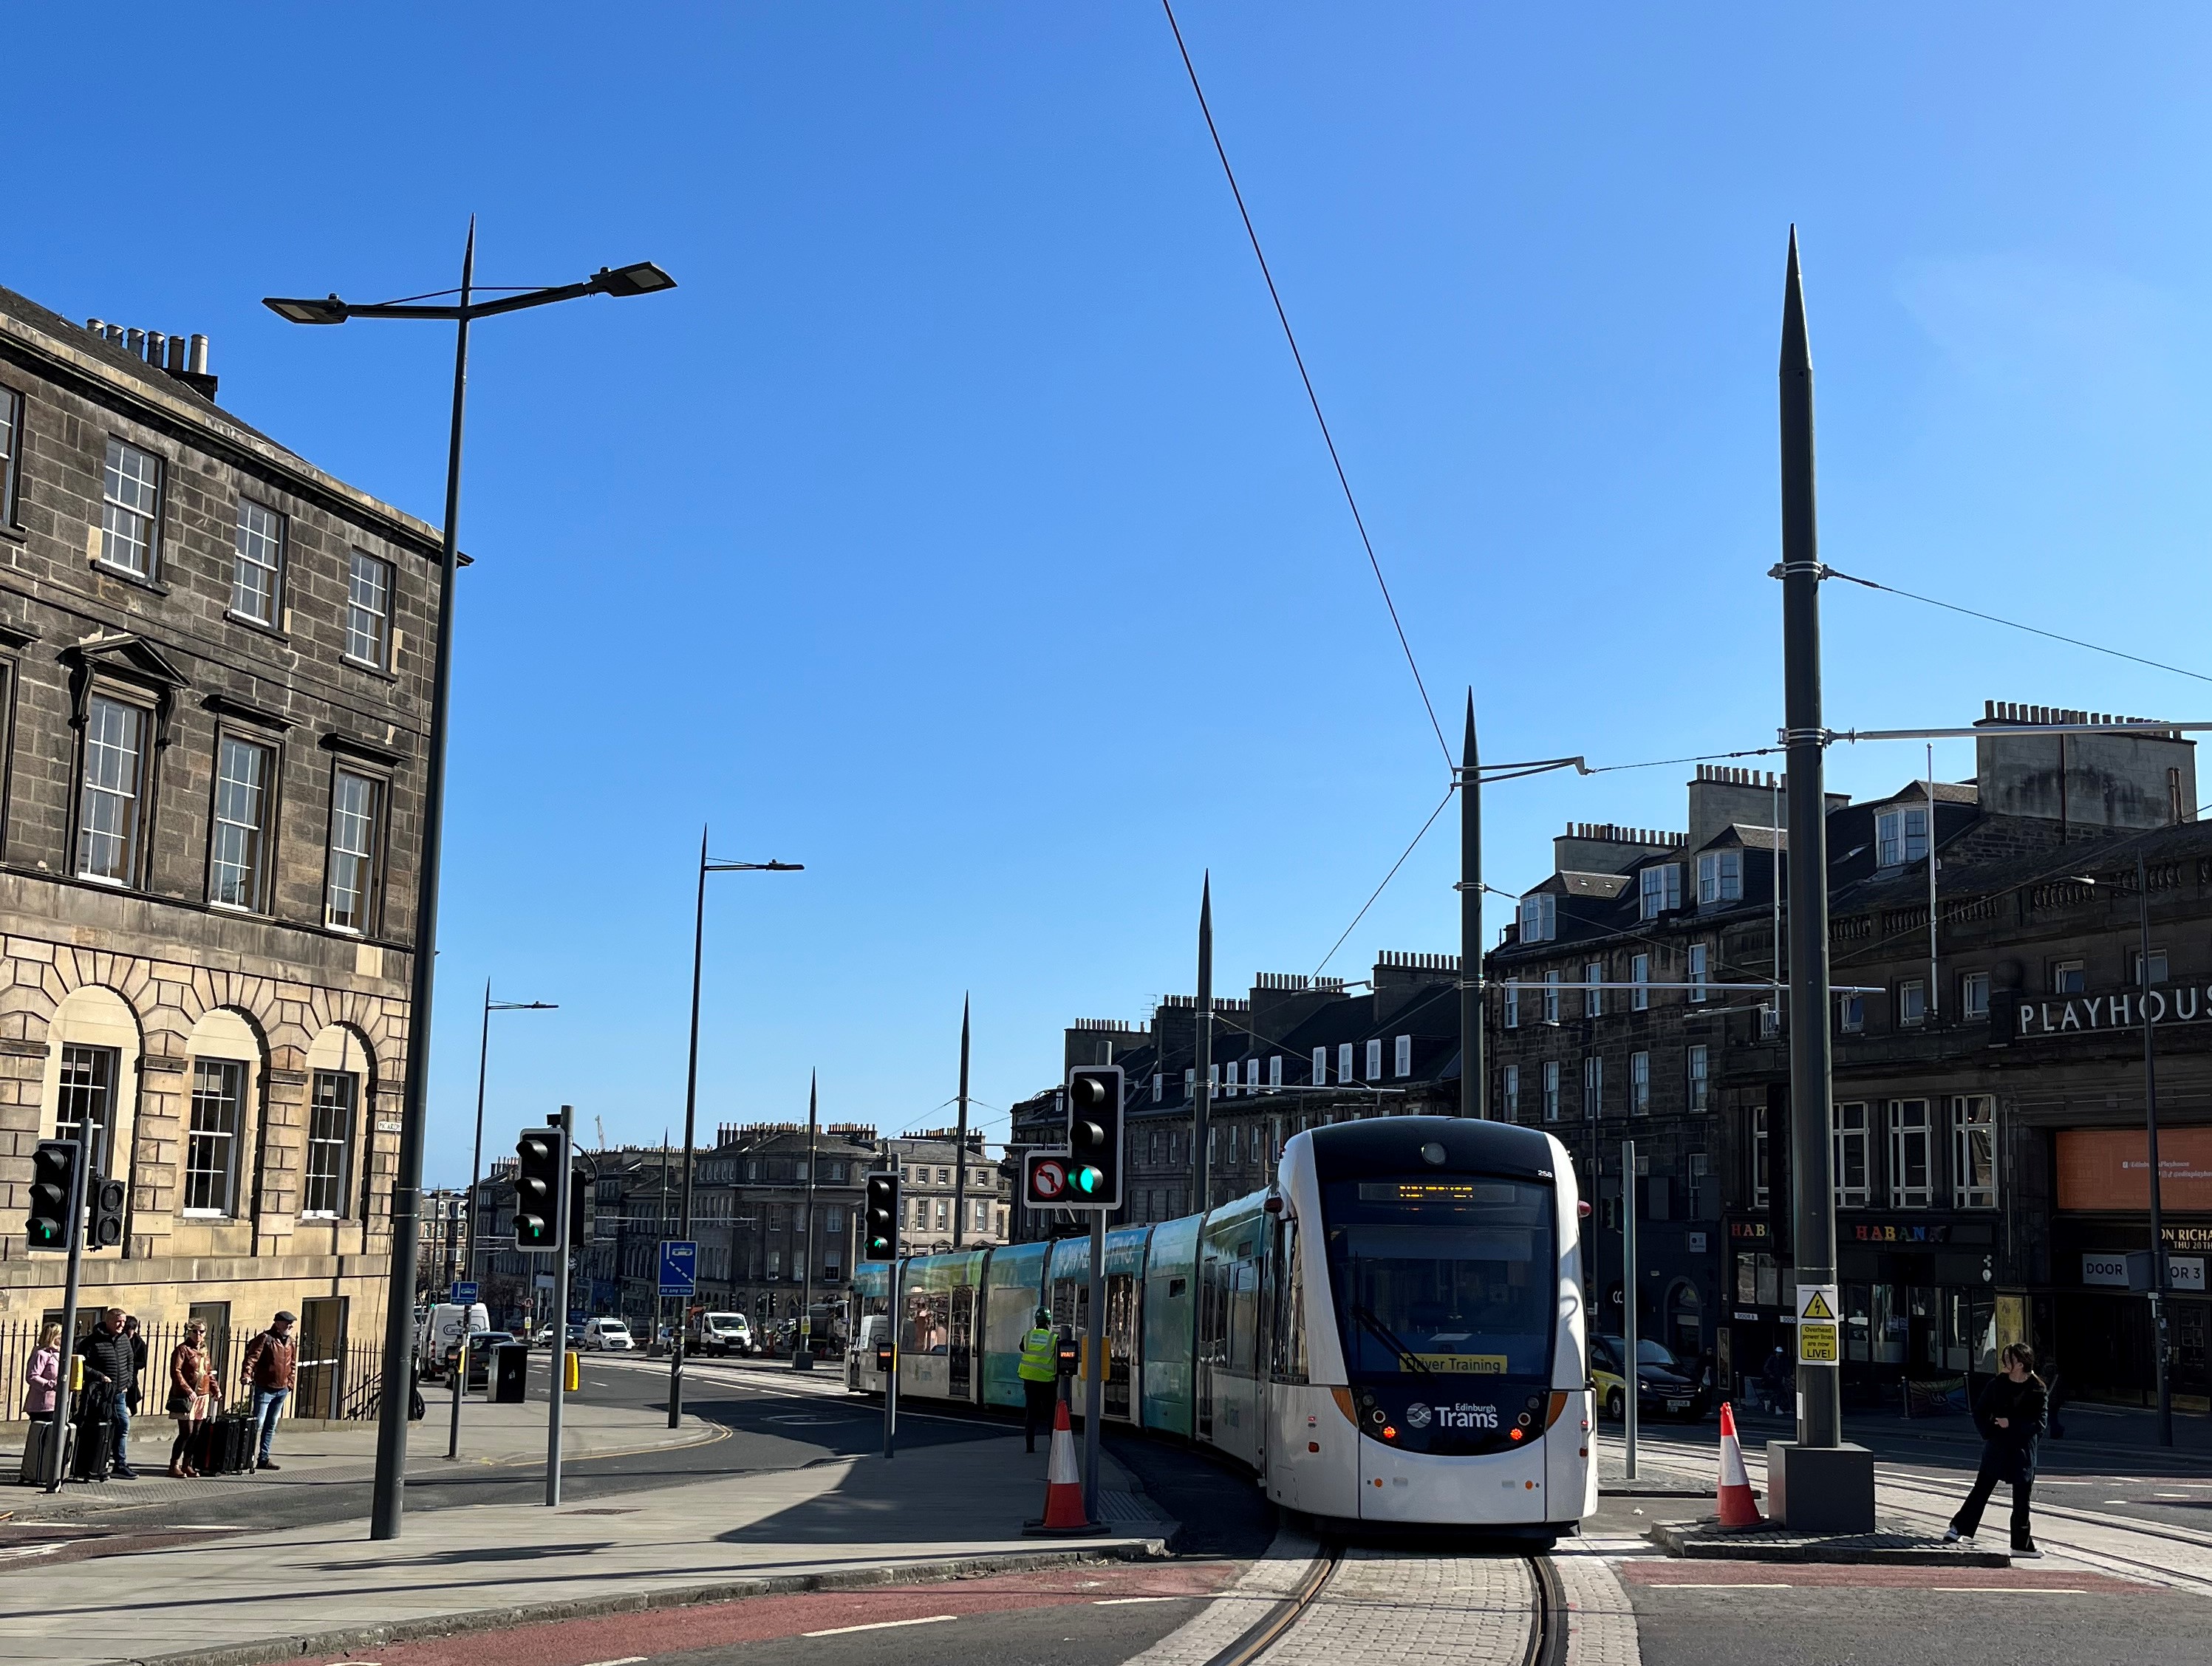 Photo of a tram heading towards Leith Walk from Picardy Place. The Playhouse can be seen on the right